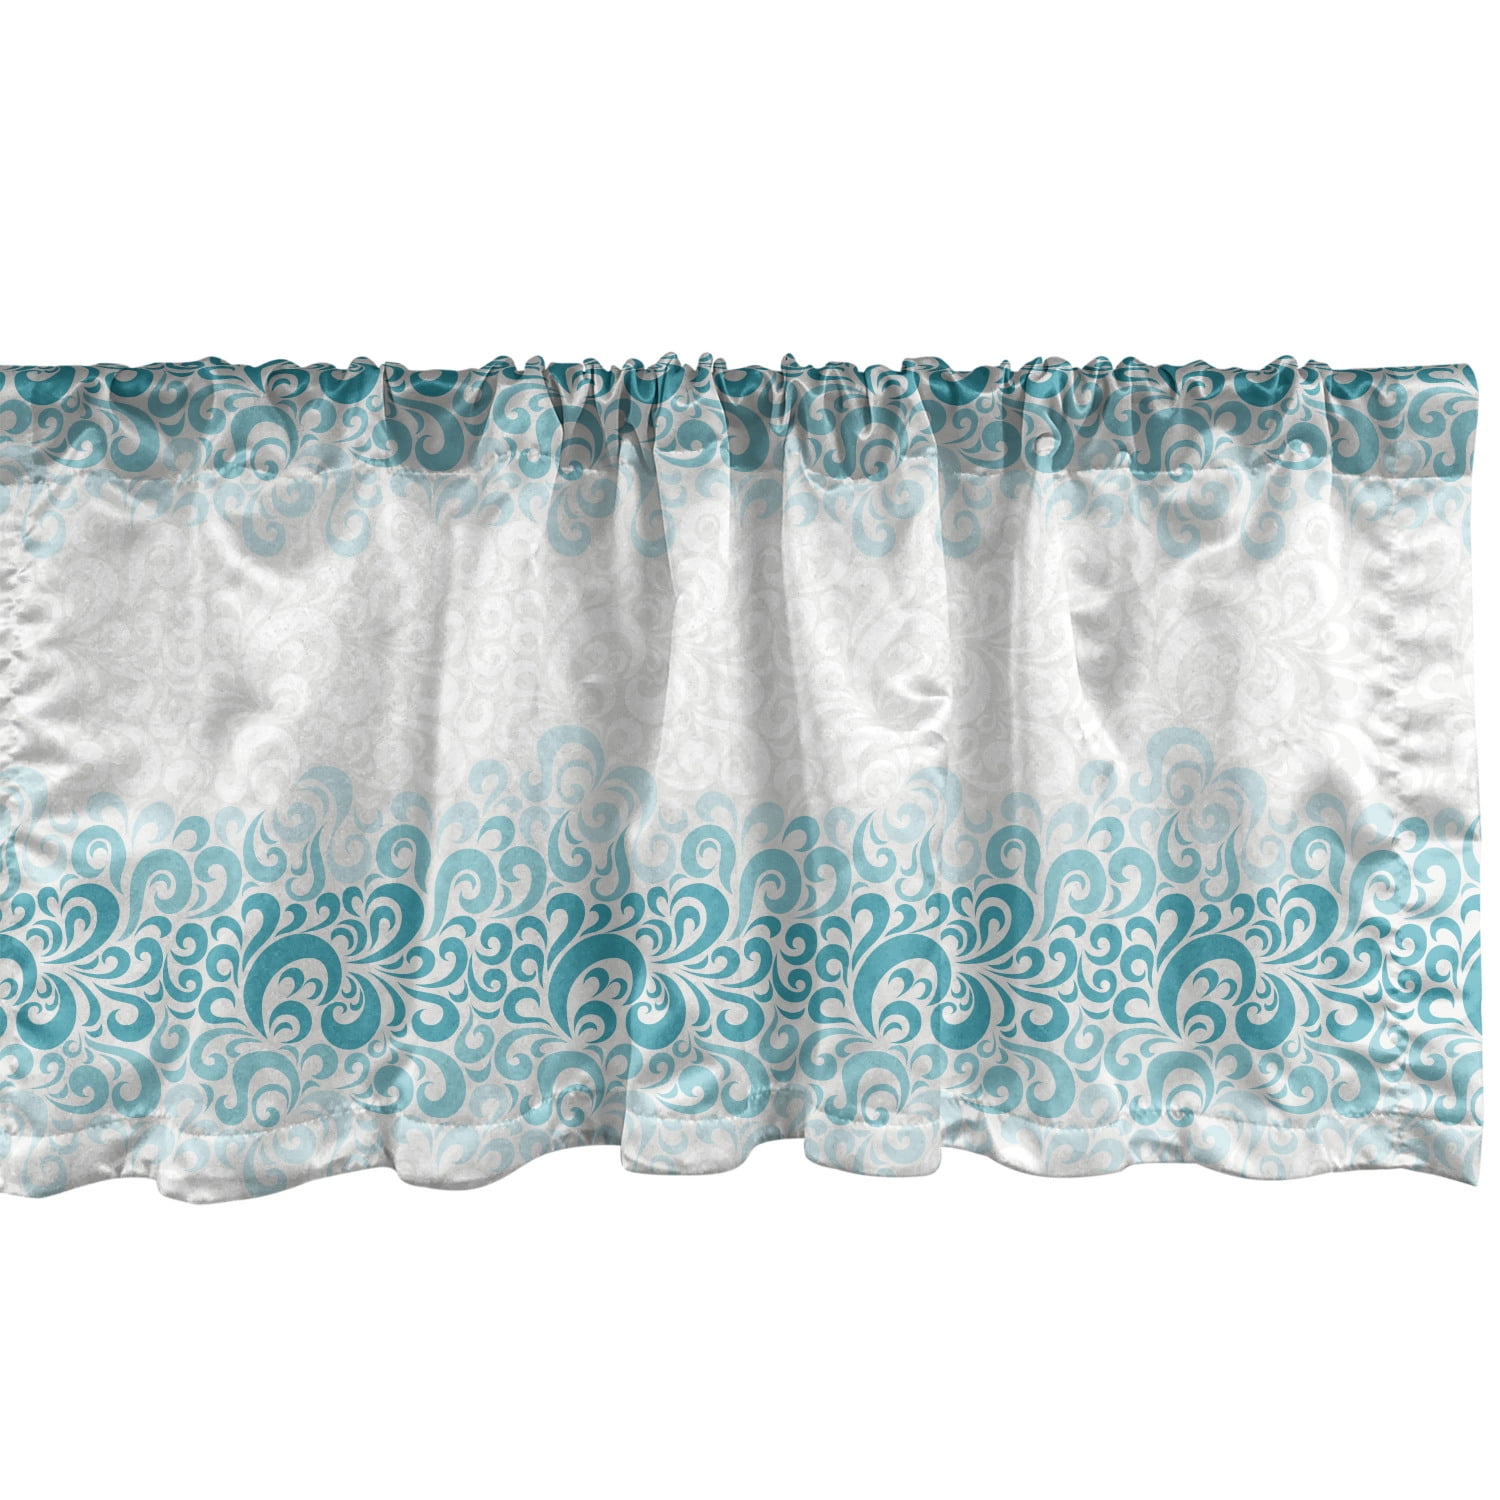 Turquoise Teal 54 X 18 Curtain Valance for Kitchen Bedroom Decor with Rod Pocket Lunarable Turquoise Window Valance Flower Pattern Symmetric Antique Floral Pateren Ornaments Art Print